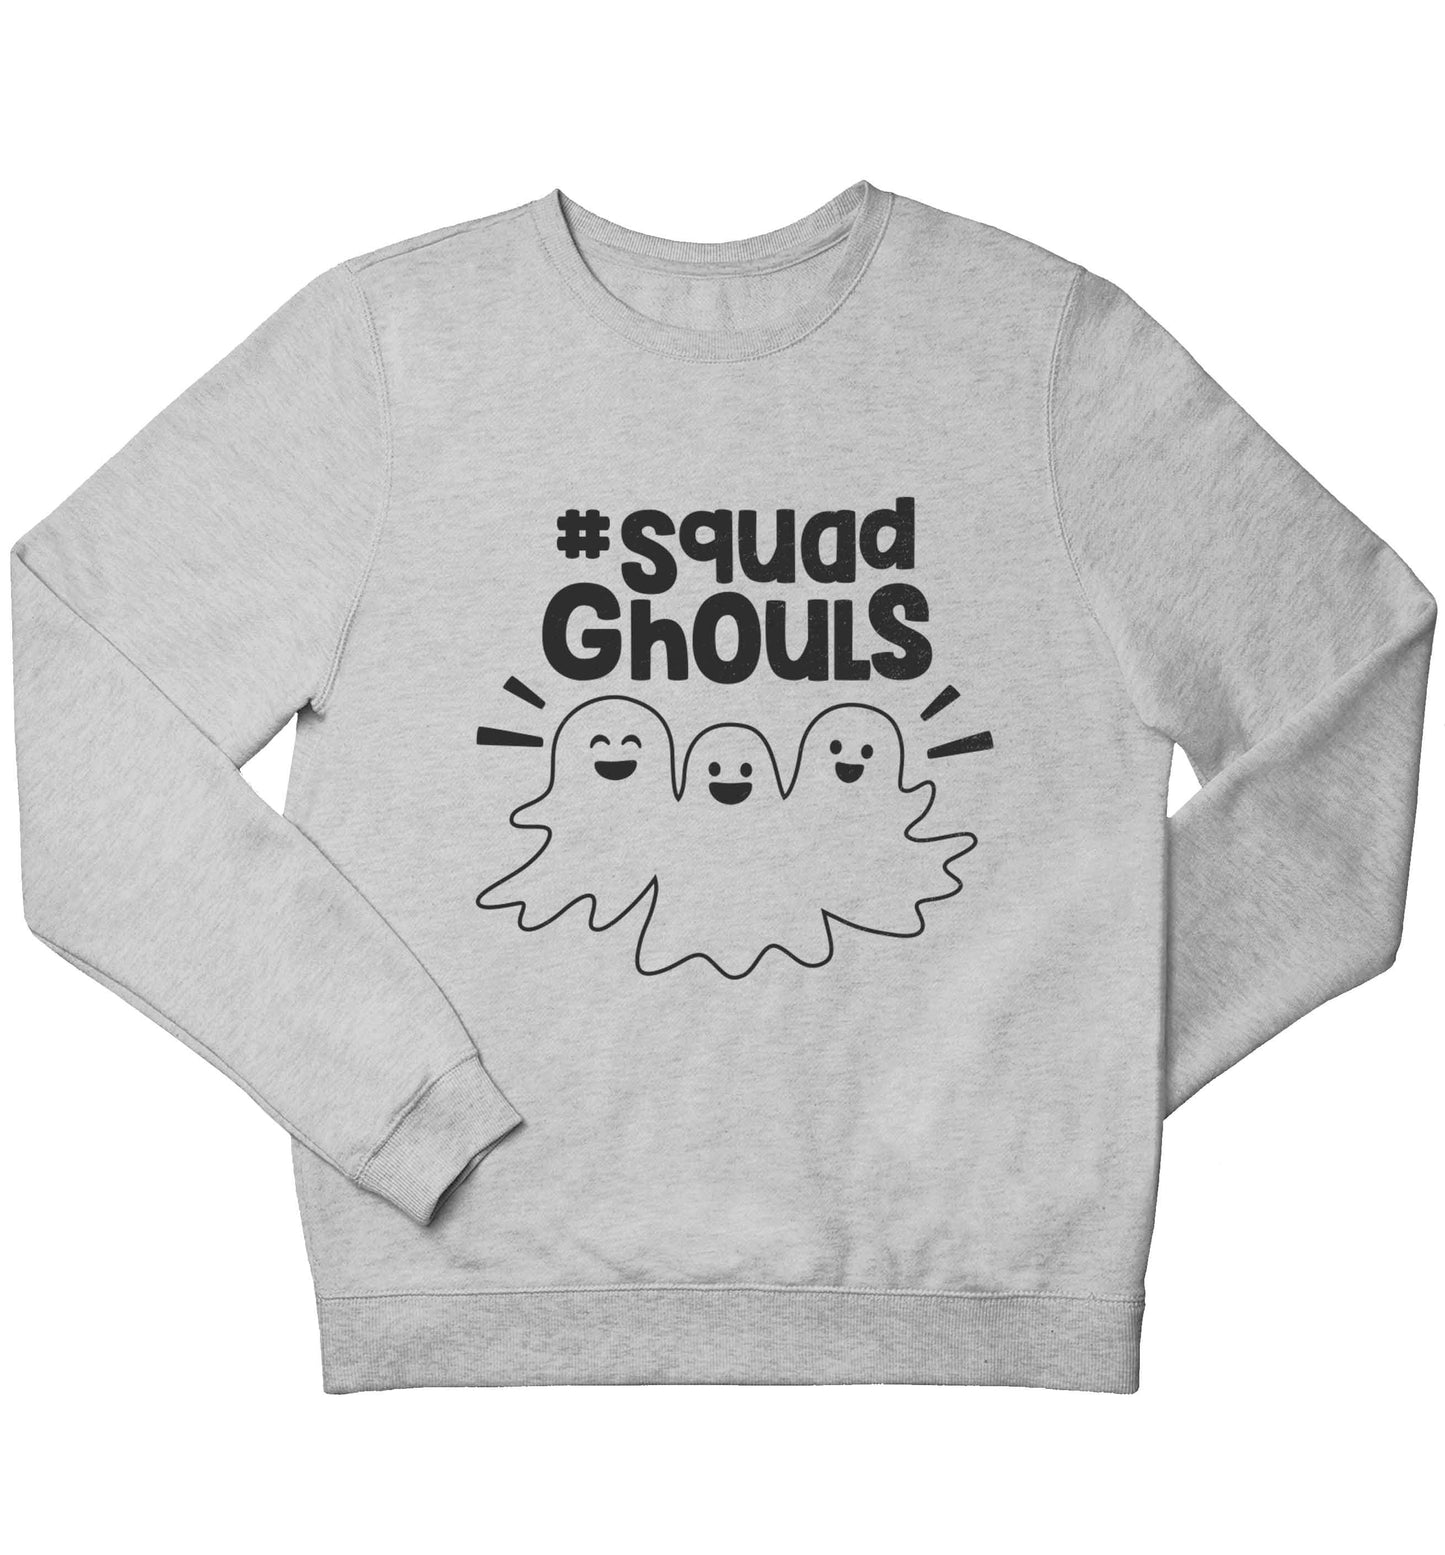 Squad ghouls Kit children's grey sweater 12-13 Years